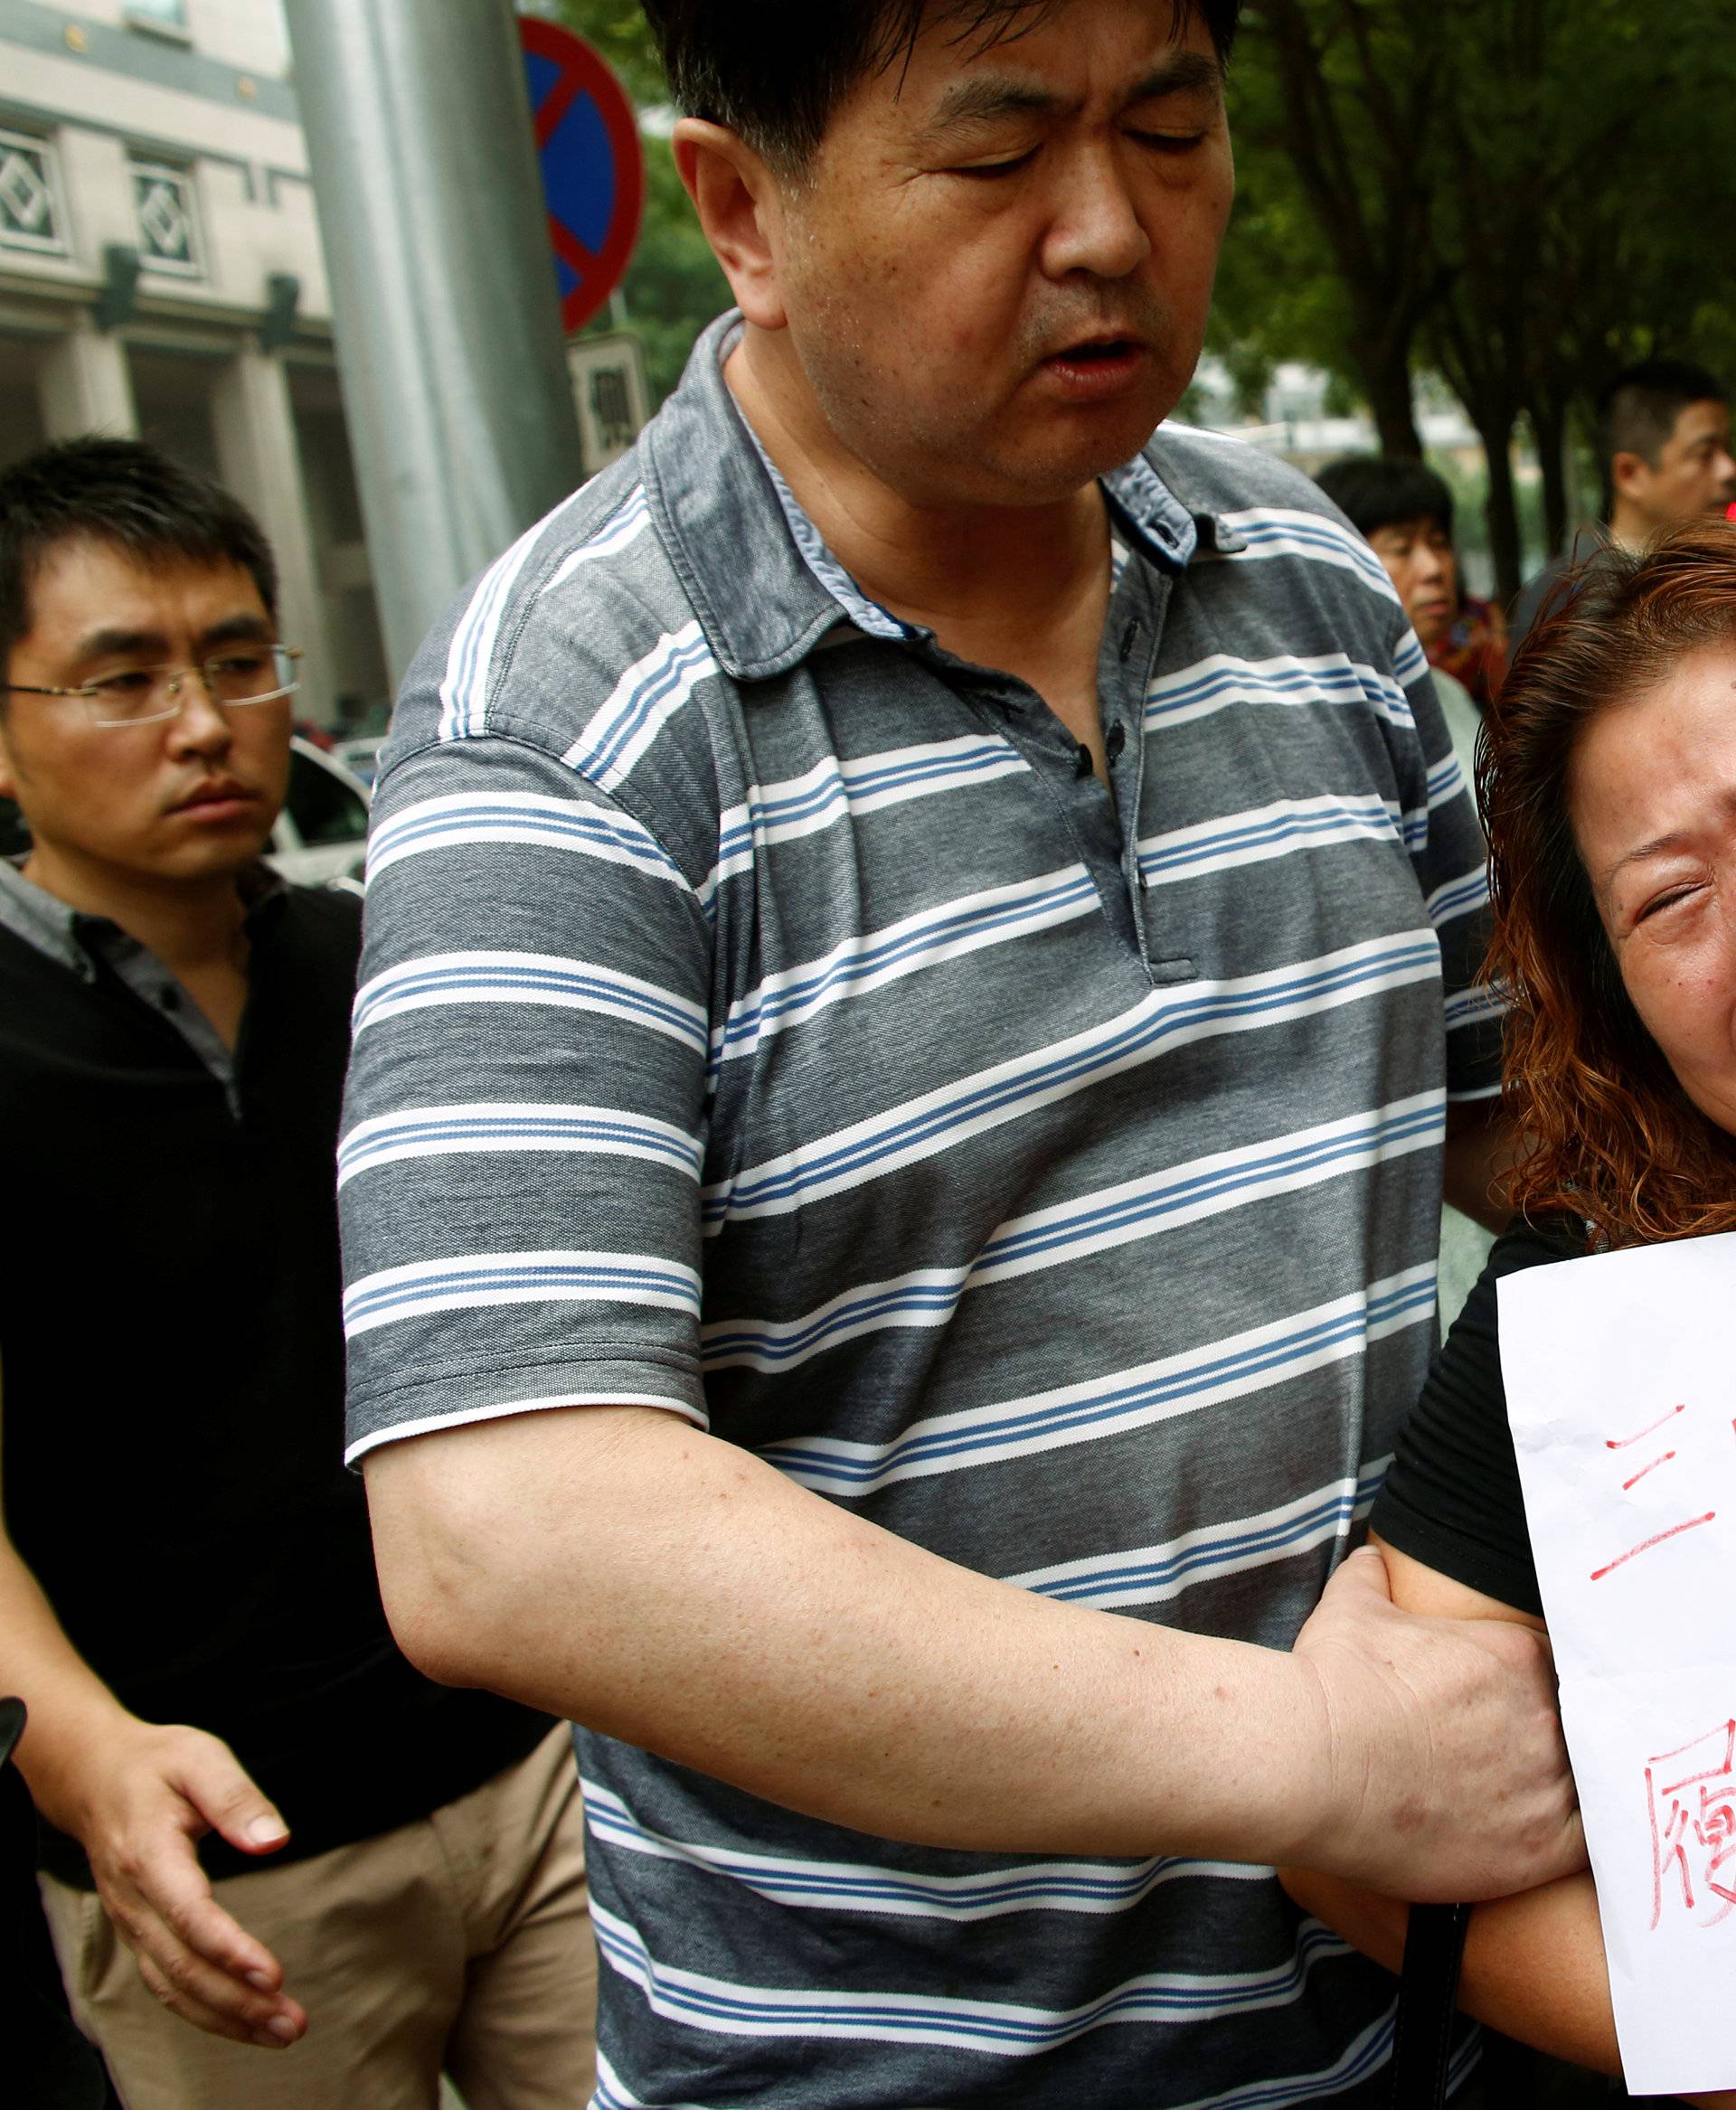 A family member of a passenger aboard Malaysia Airlines flight MH370 which went missing in 2014 reacts during a protest outside the Chinese foreign ministry in Beijing